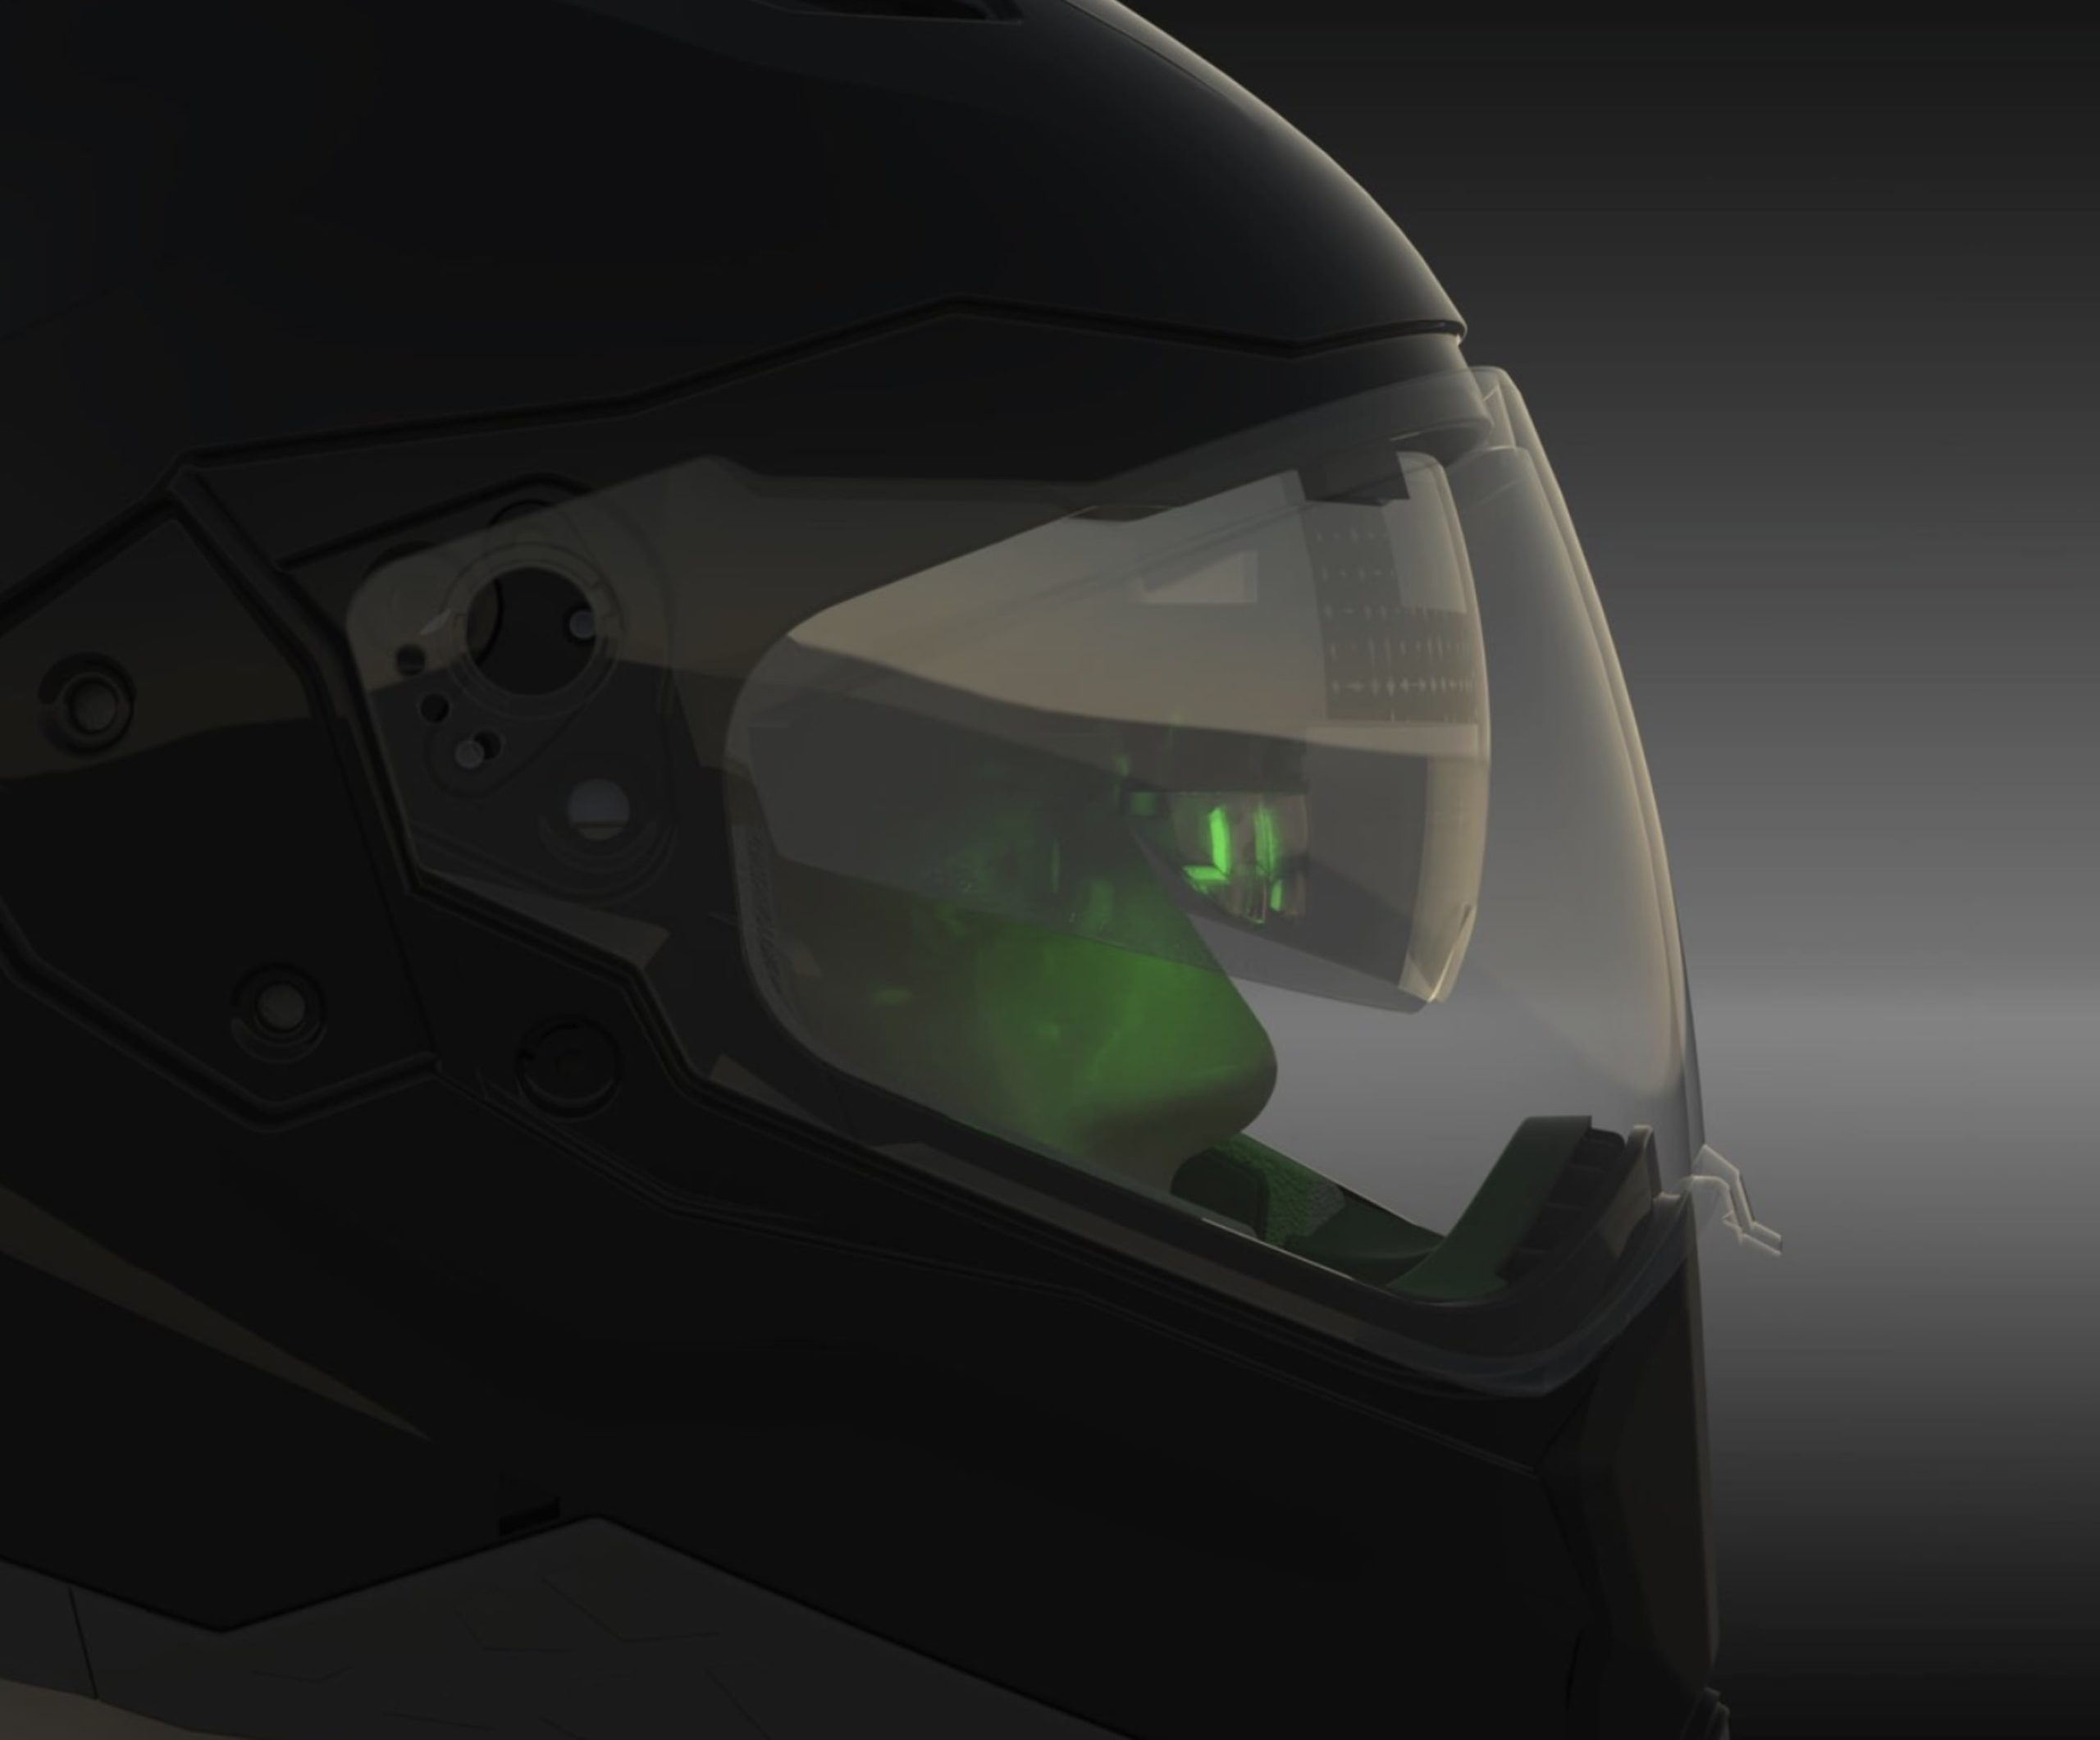 A view of the Aegis Rider riding enhancement aid glasses currently in beta testing phase